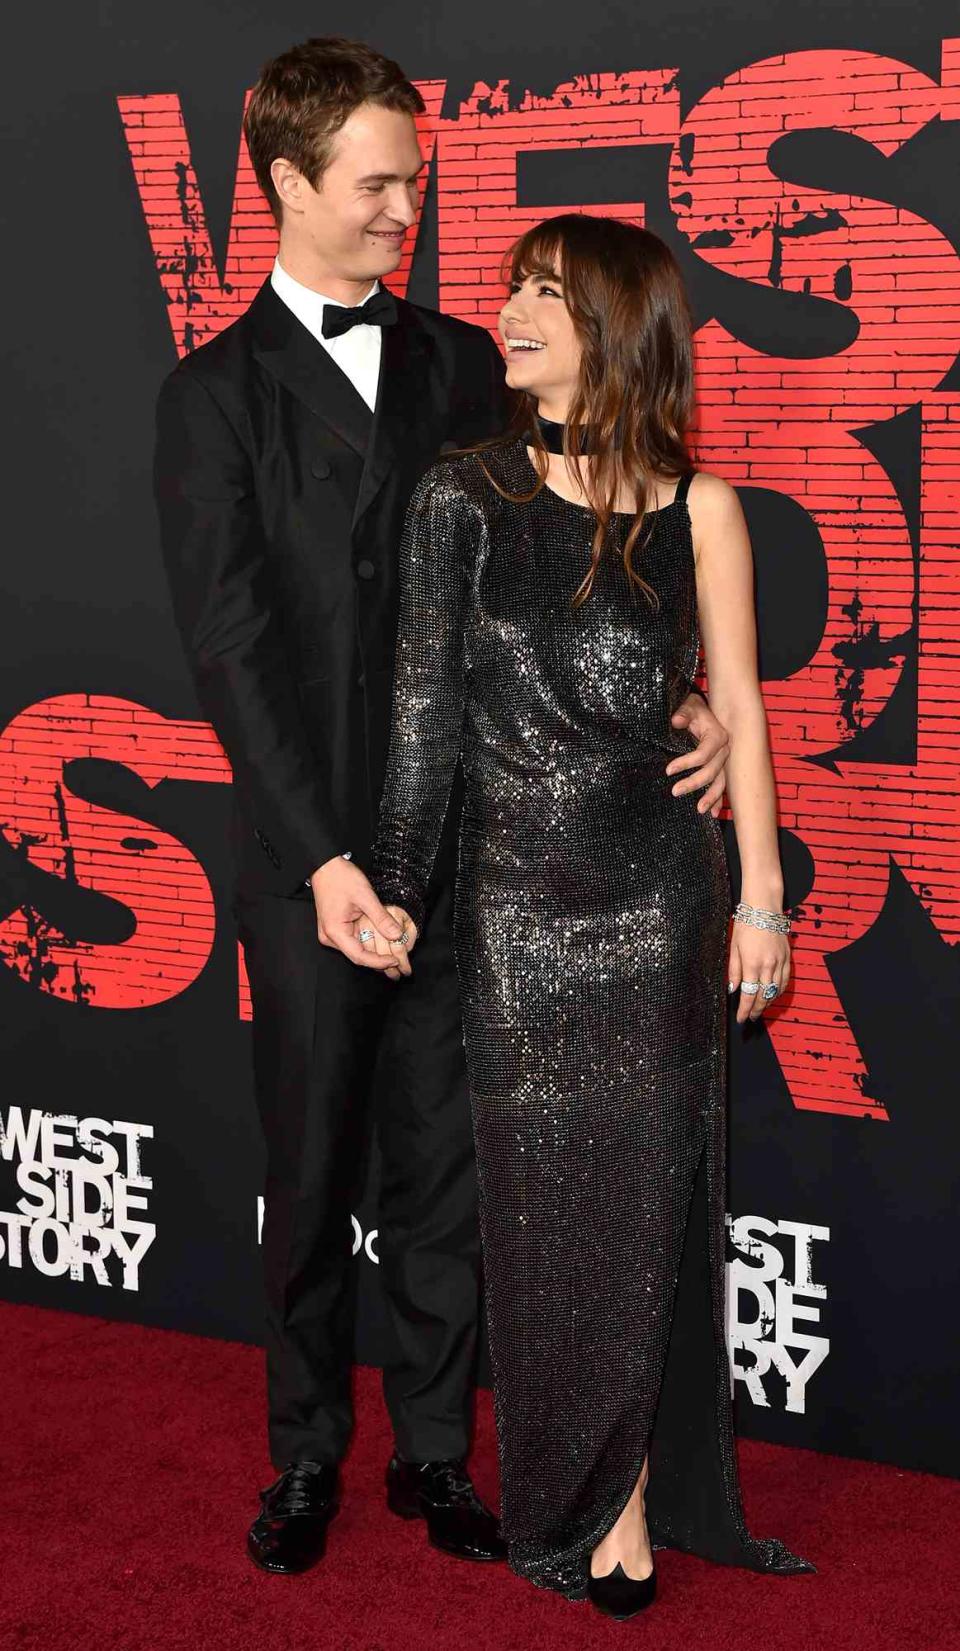 Ansel Elgort and Violetta Komyshan attend Disney Studios' Los Angeles Premiere of "West Side Story" at El Capitan Theatre on December 07, 2021 in Los Angeles, California